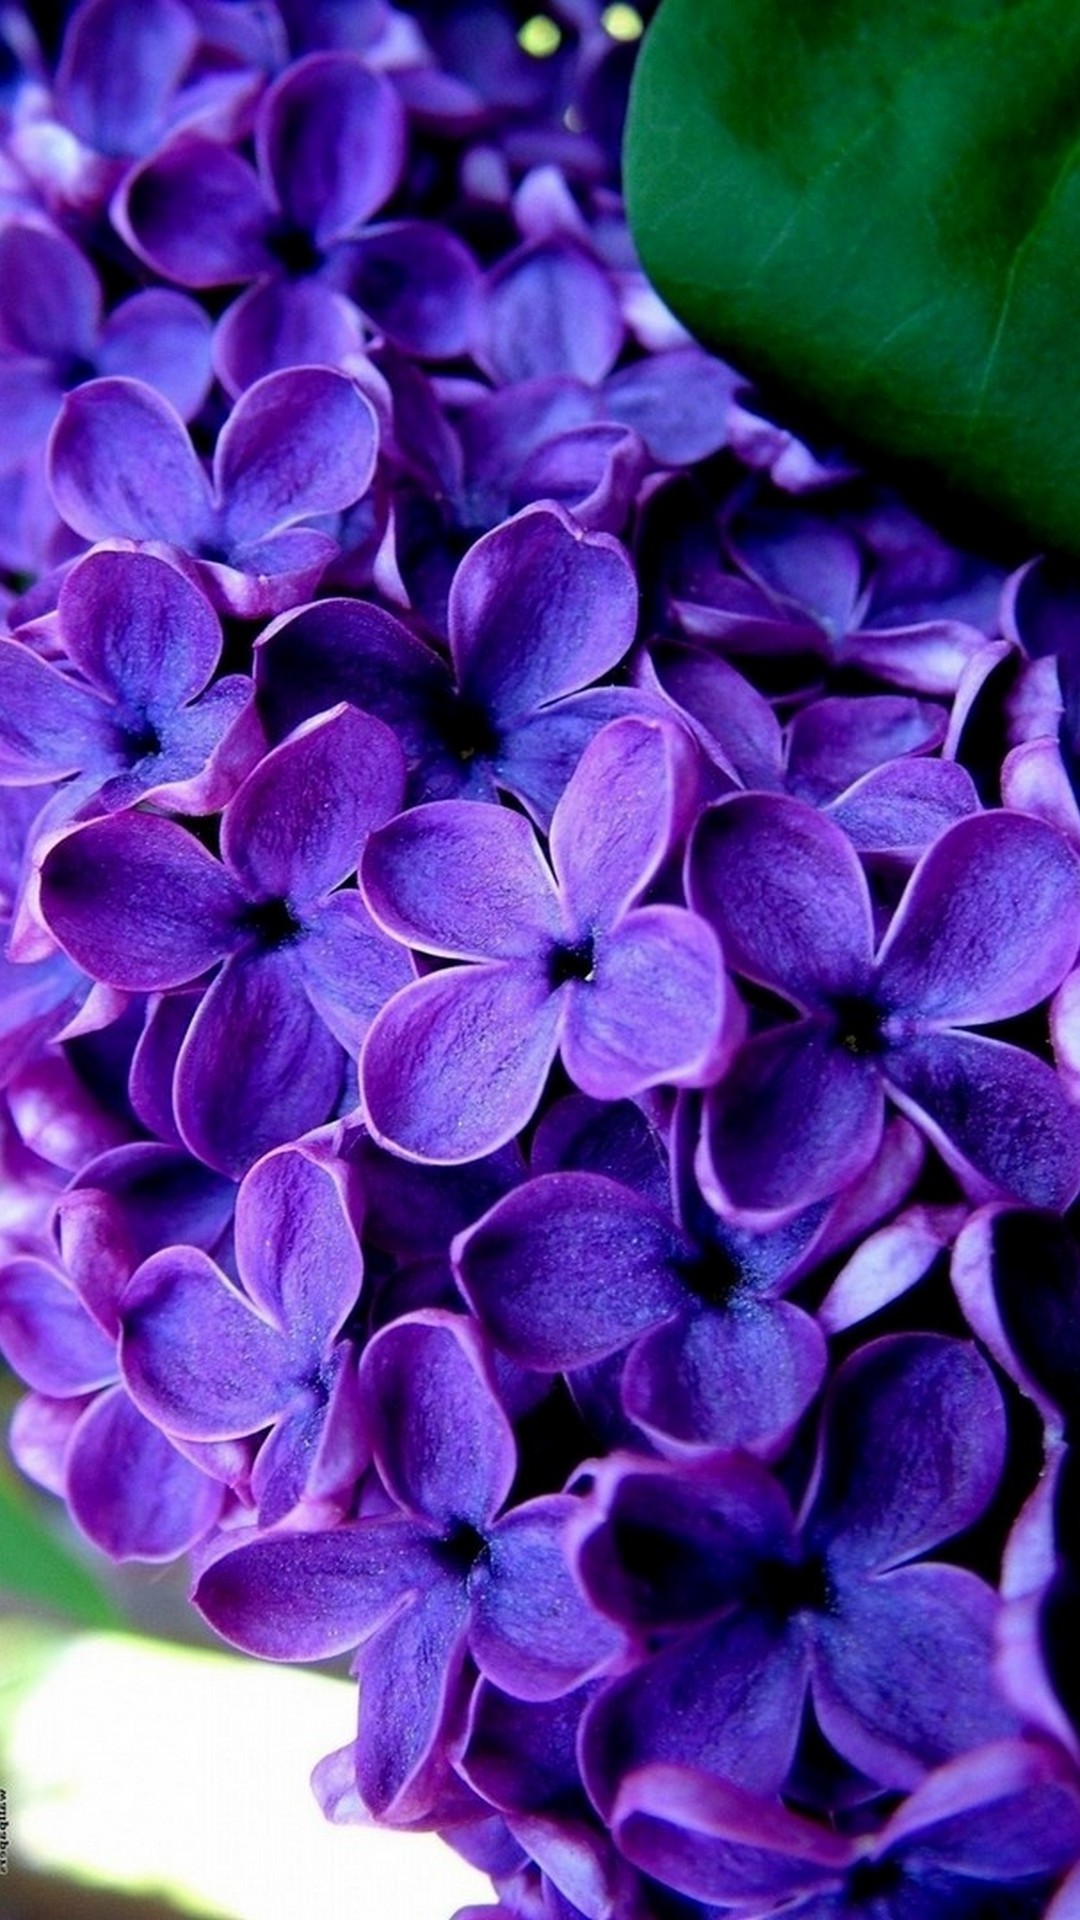 Purple Flowers Mobile Wallpaper Hd - Flowers Images For Mobile - HD Wallpaper 